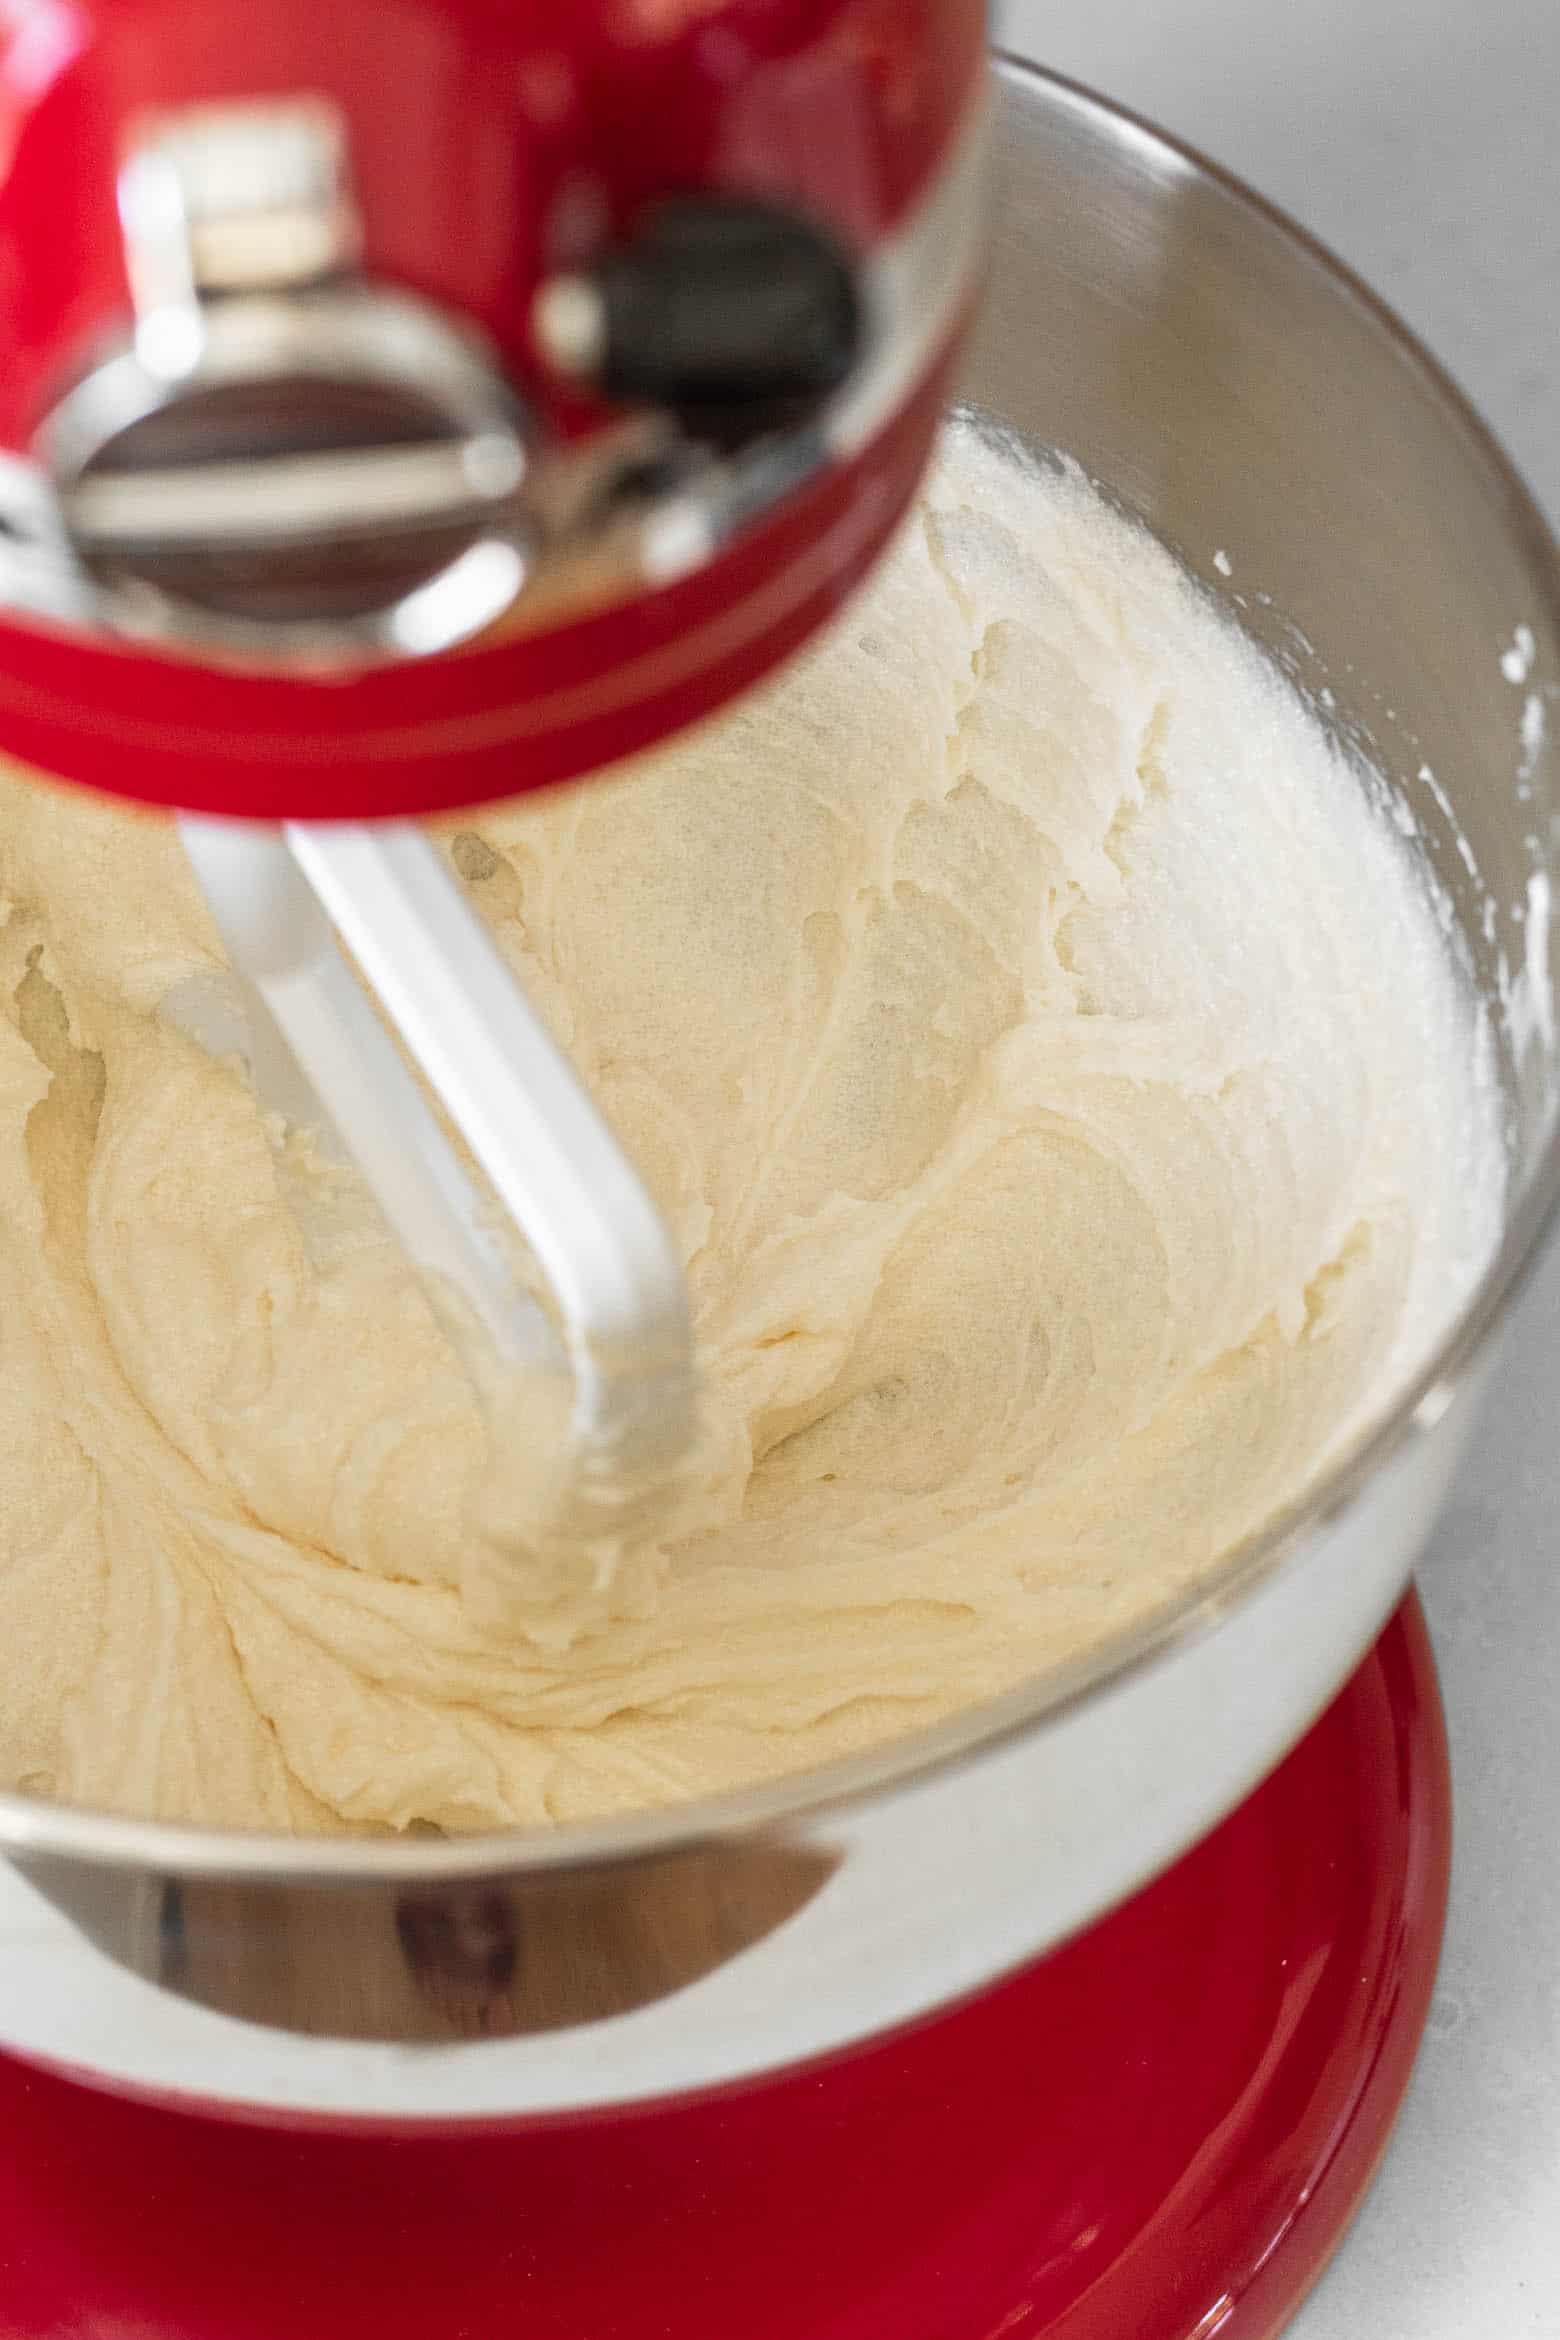 Cream the butter and sugar in the bowl of a stand mixer.